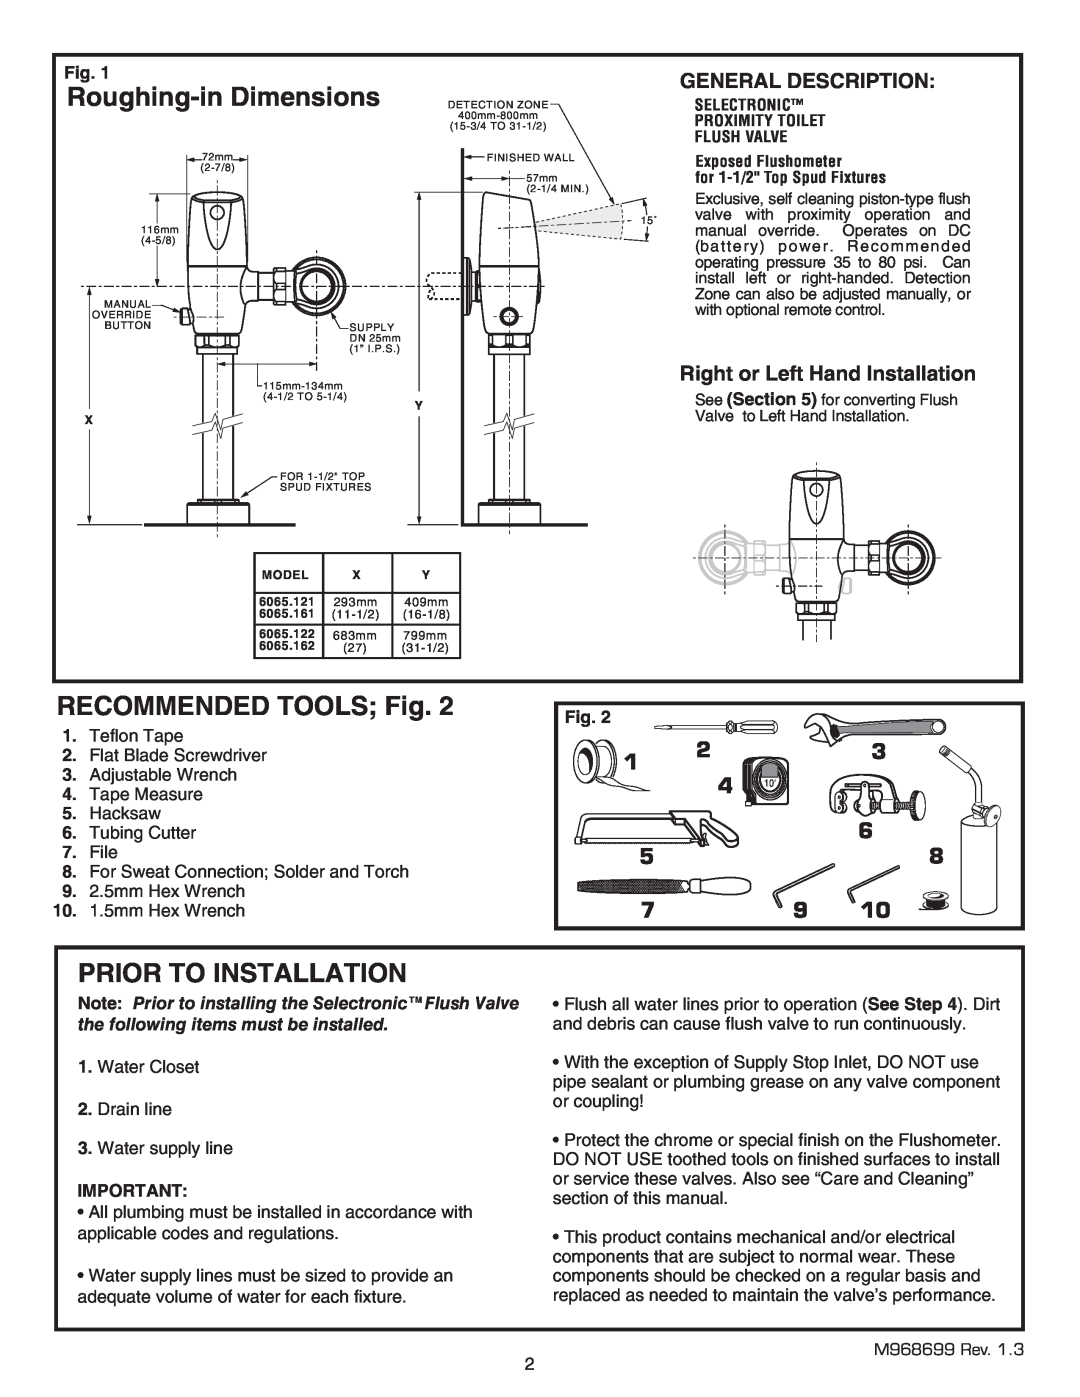 American Standard 6065.121 Roughing-inDimensions, RECOMMENDED TOOLS Fig, Prior To Installation, General Description 